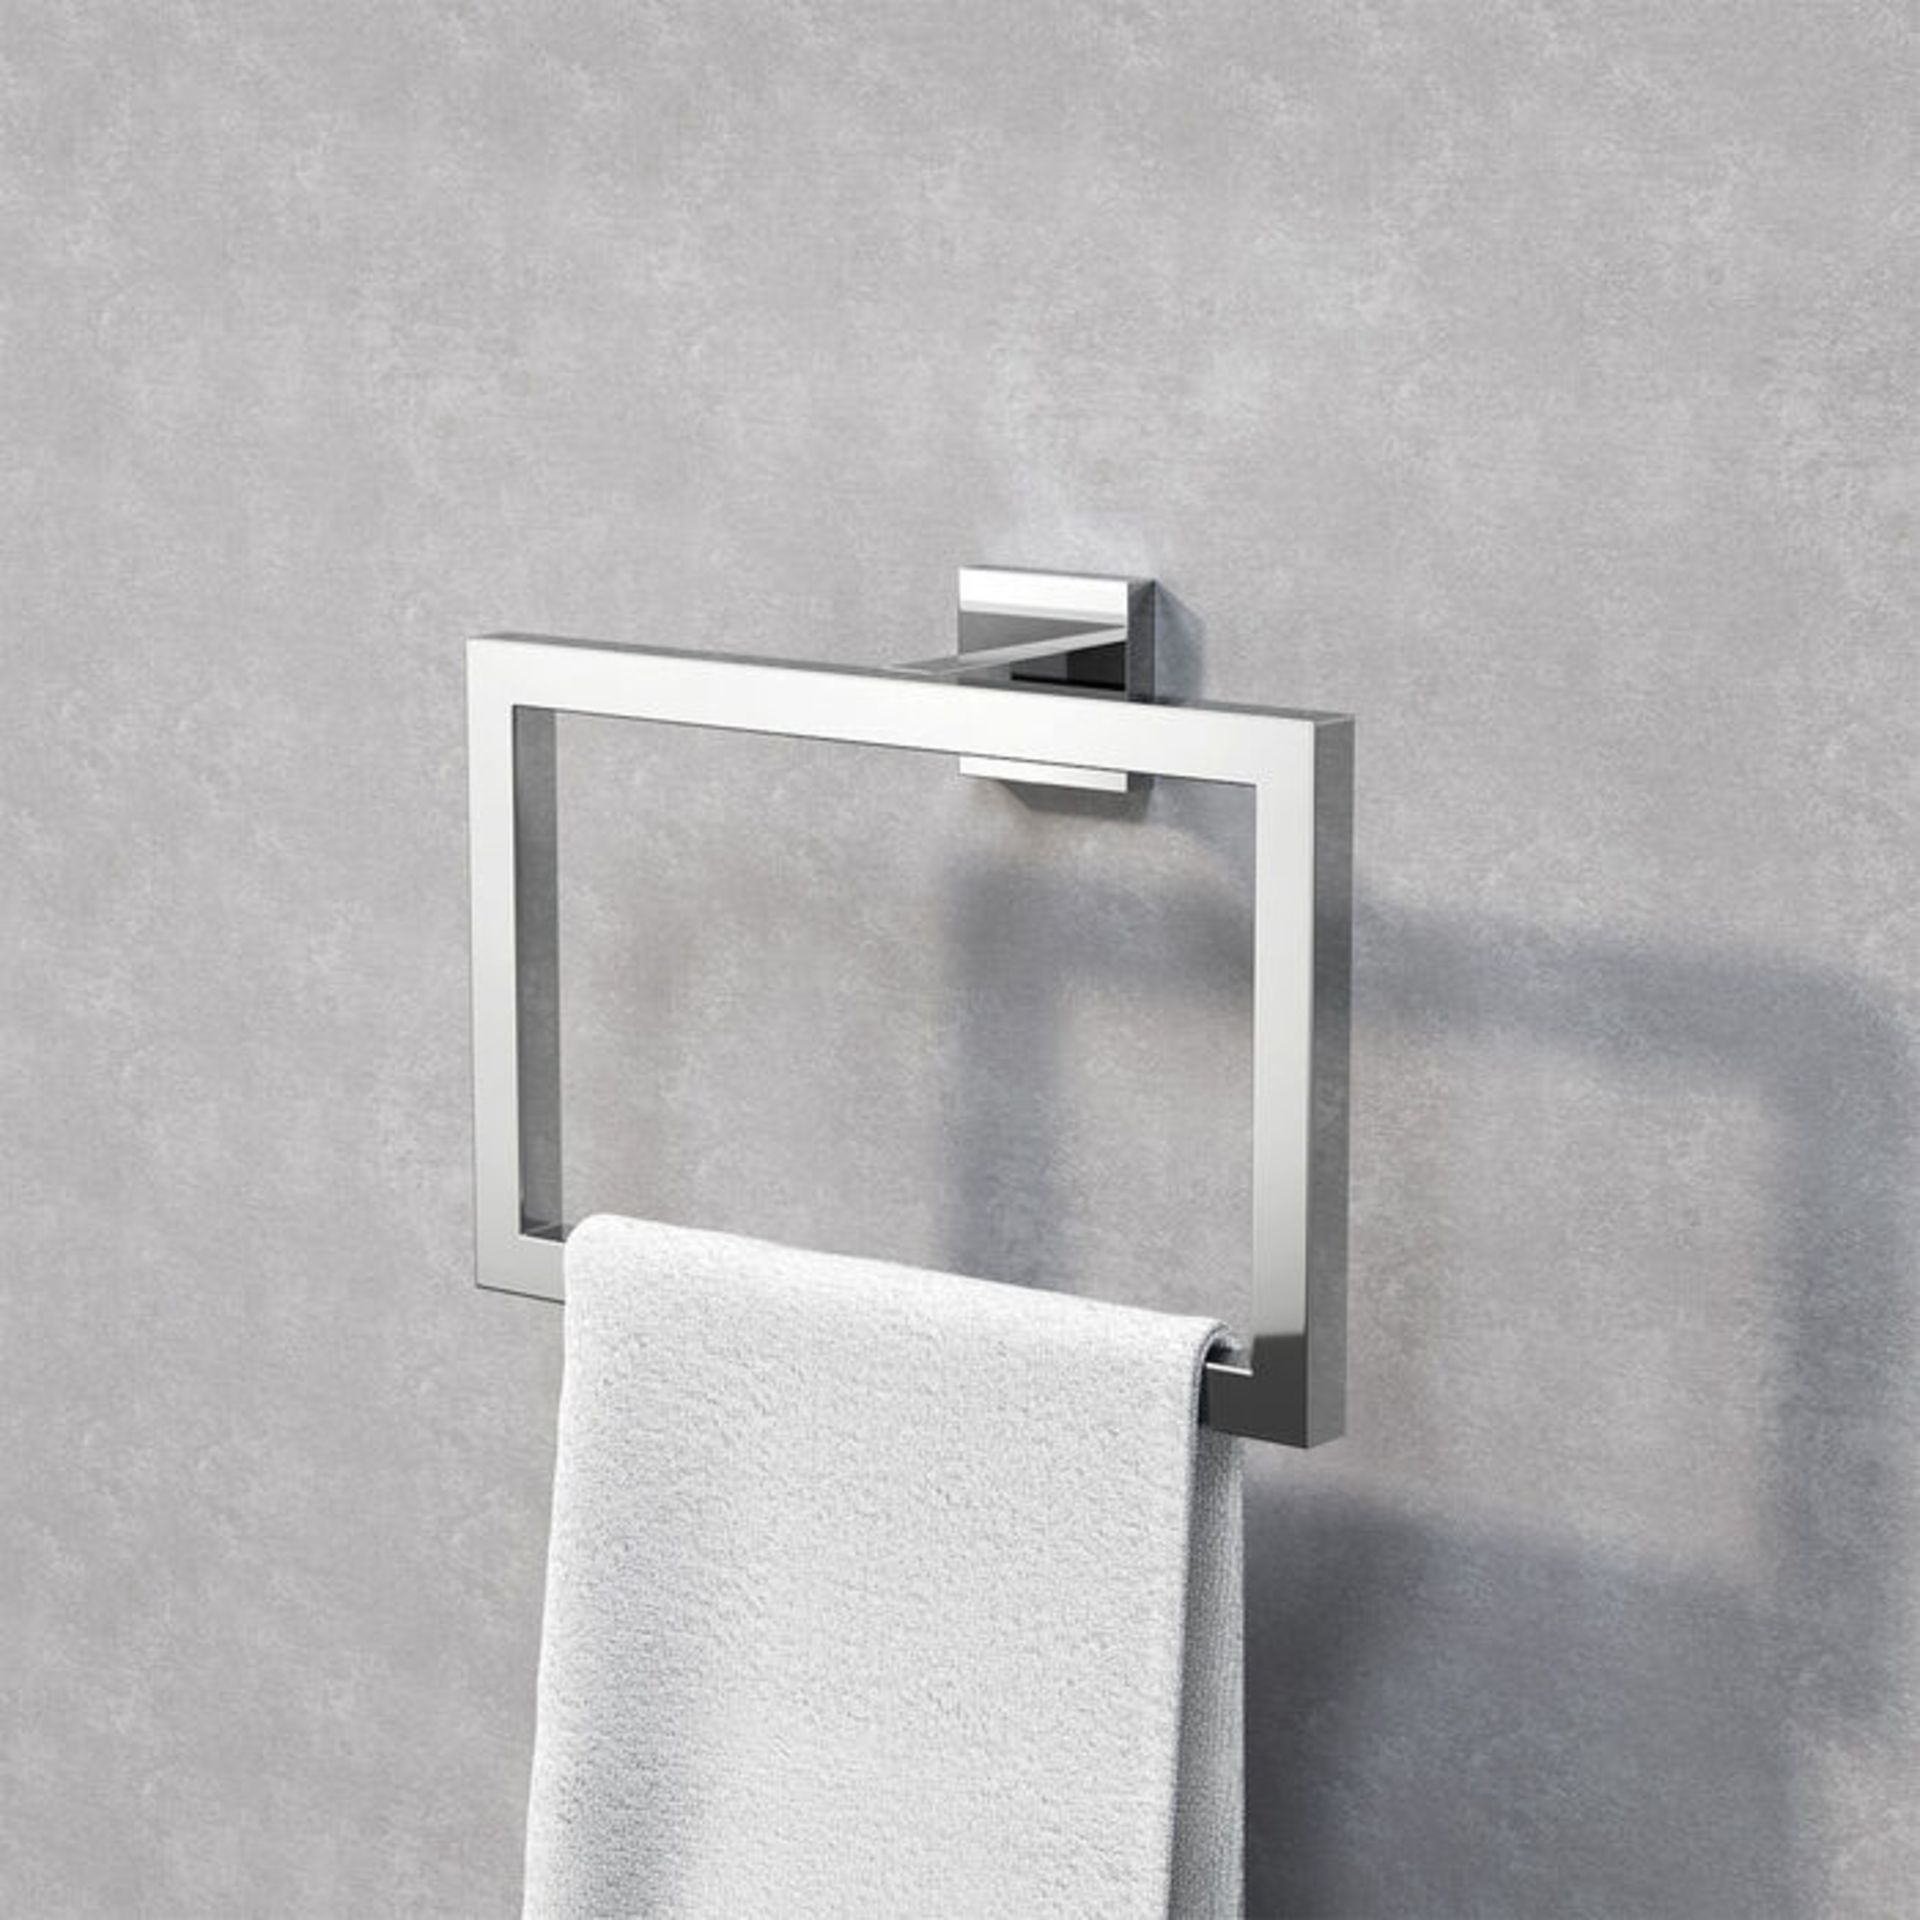 (QP203) Jesmond Towel Ring Finishes your bathroom with a little extra functionality and style ... (